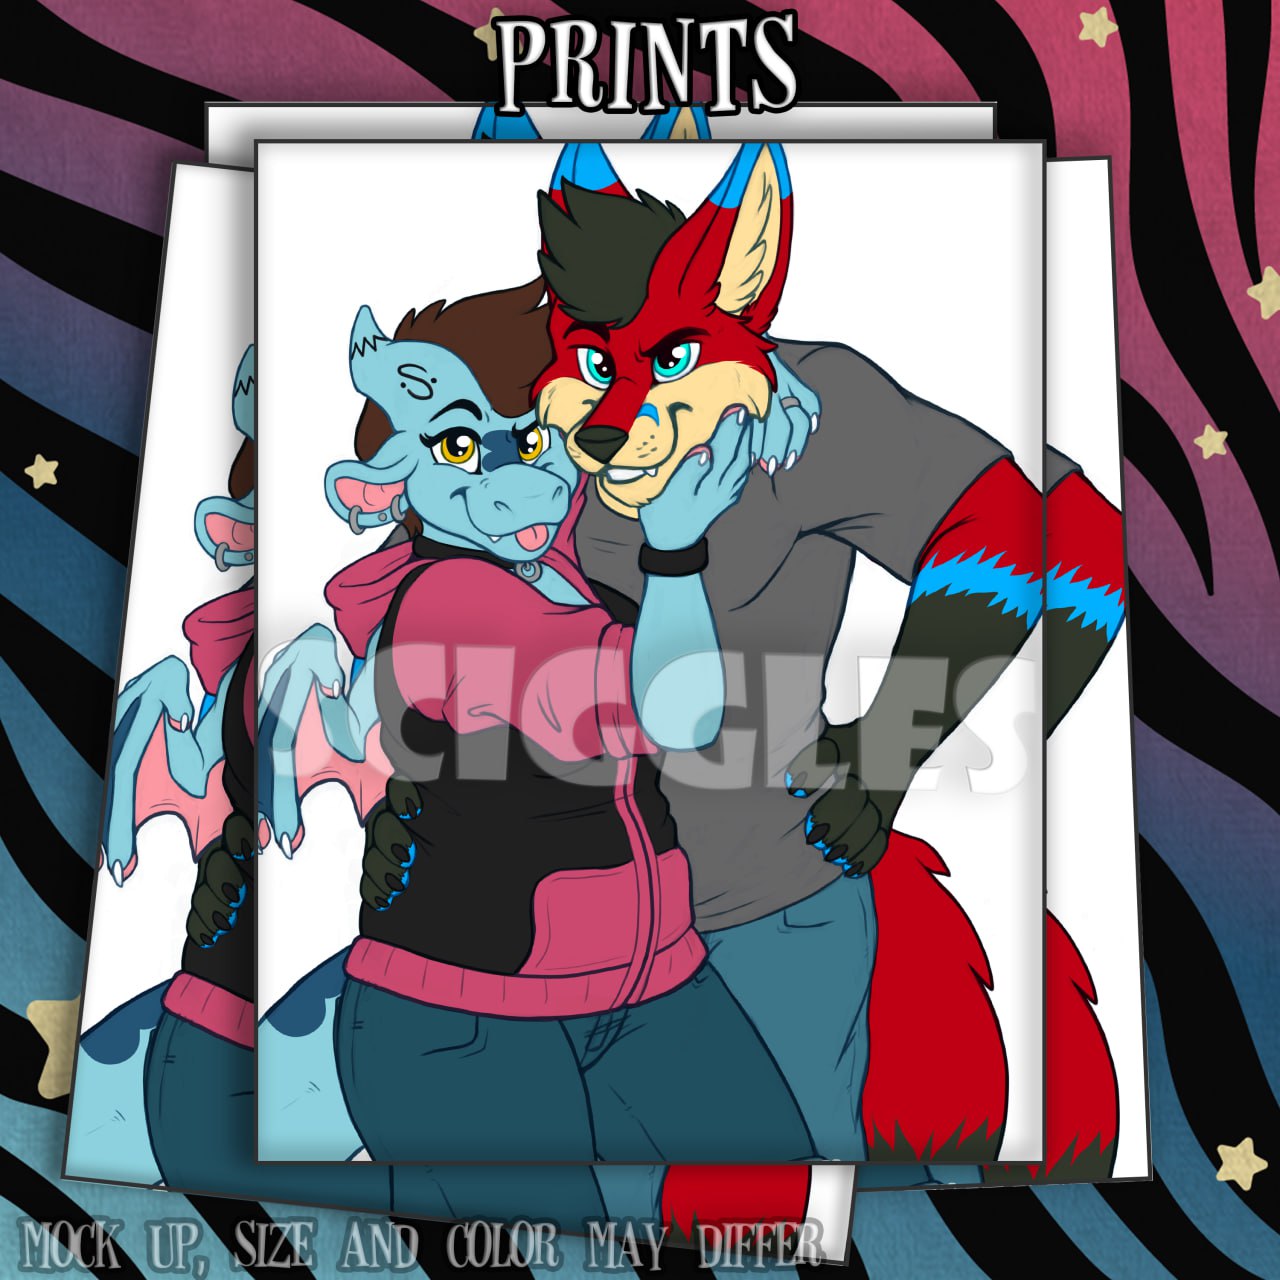 Friends Sciggles and Jericho_fox Prints - 4"x6"